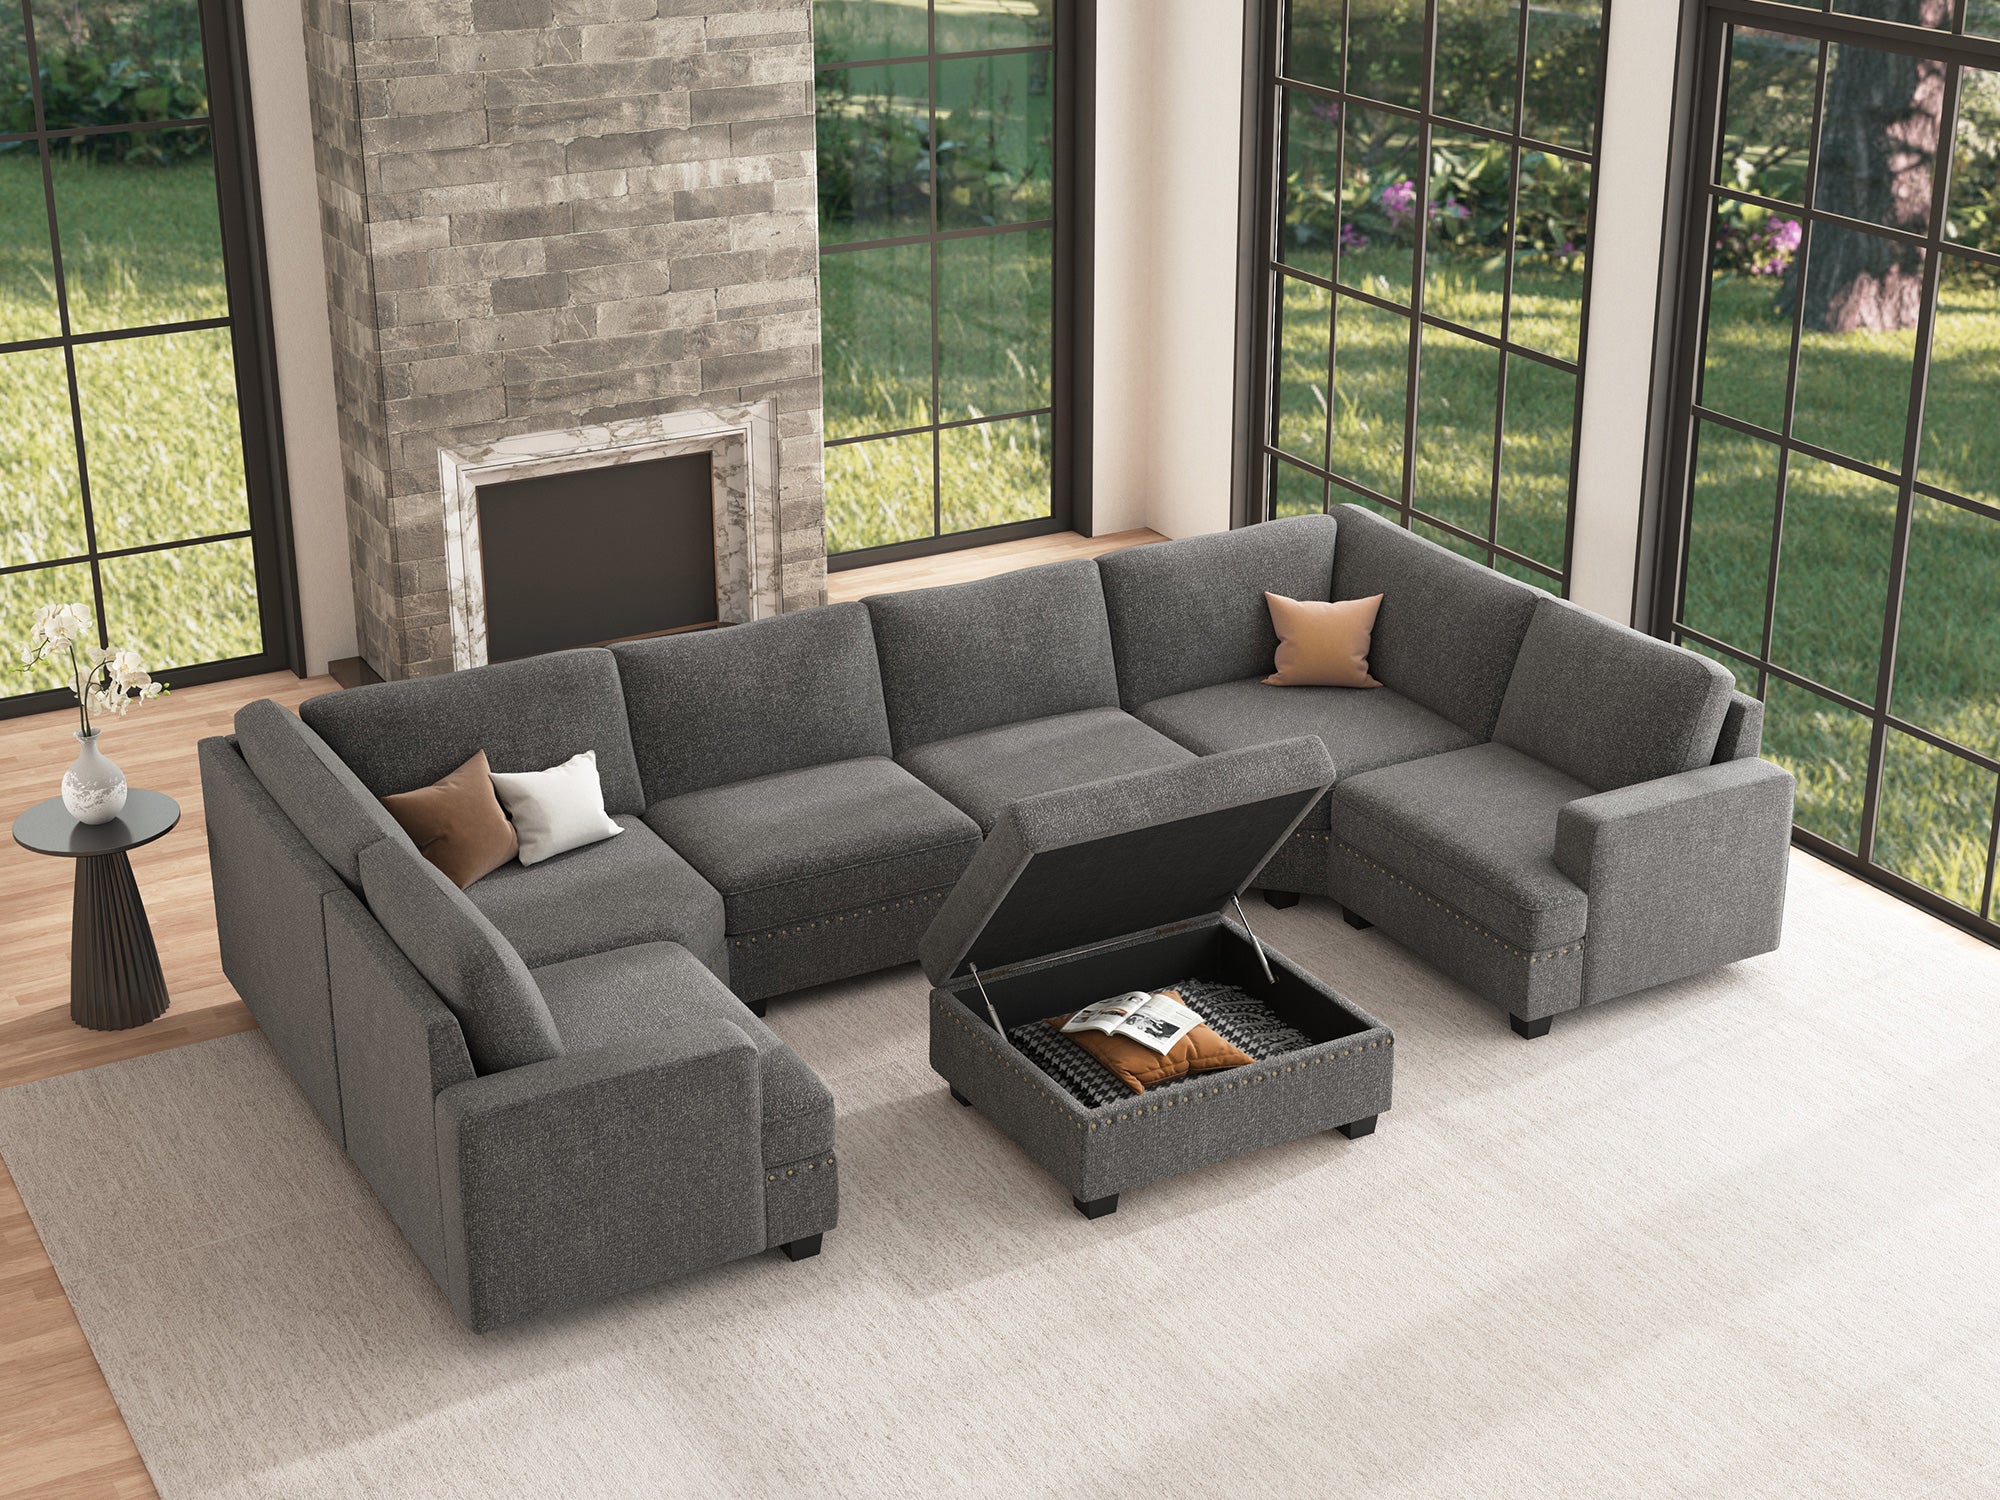 HONBAY 6-Seat U Shaped Corner Modular Sofa Oversized Sectional Sofa Couch with Storage Ottoman #Color_Light Grey